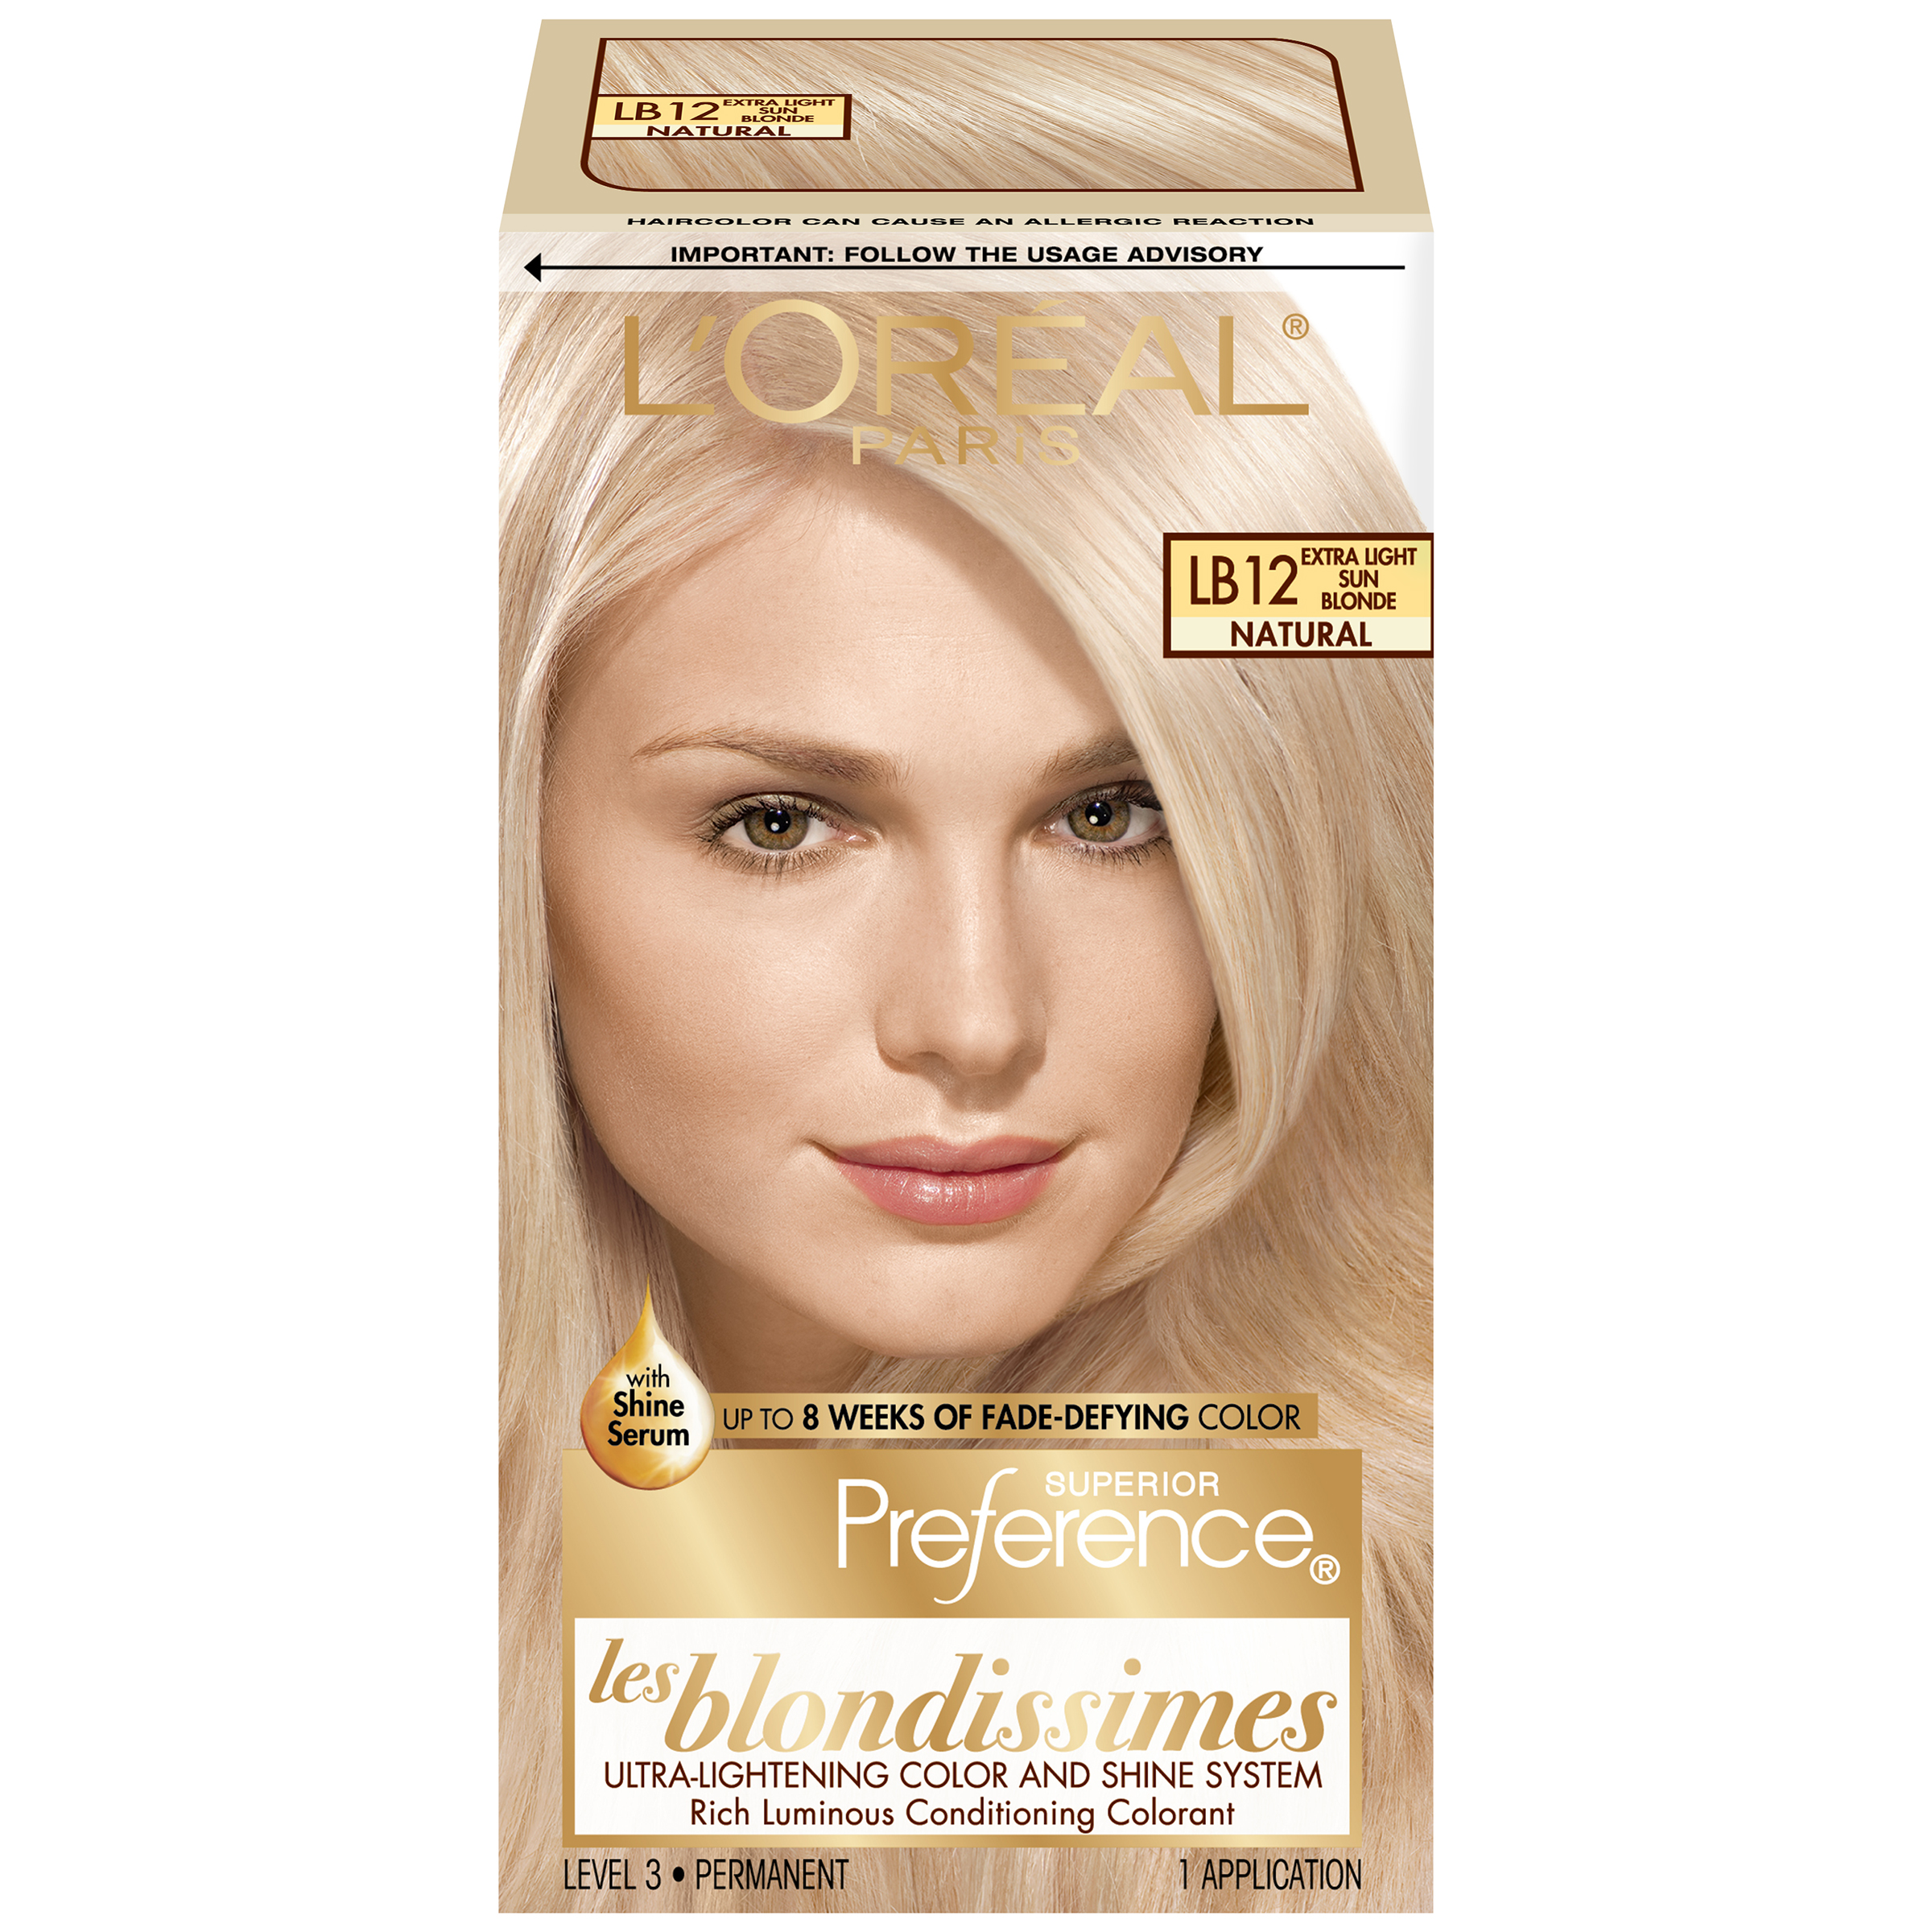 L'Oreal Superior Preference Color and Shine System Les Blondissimes